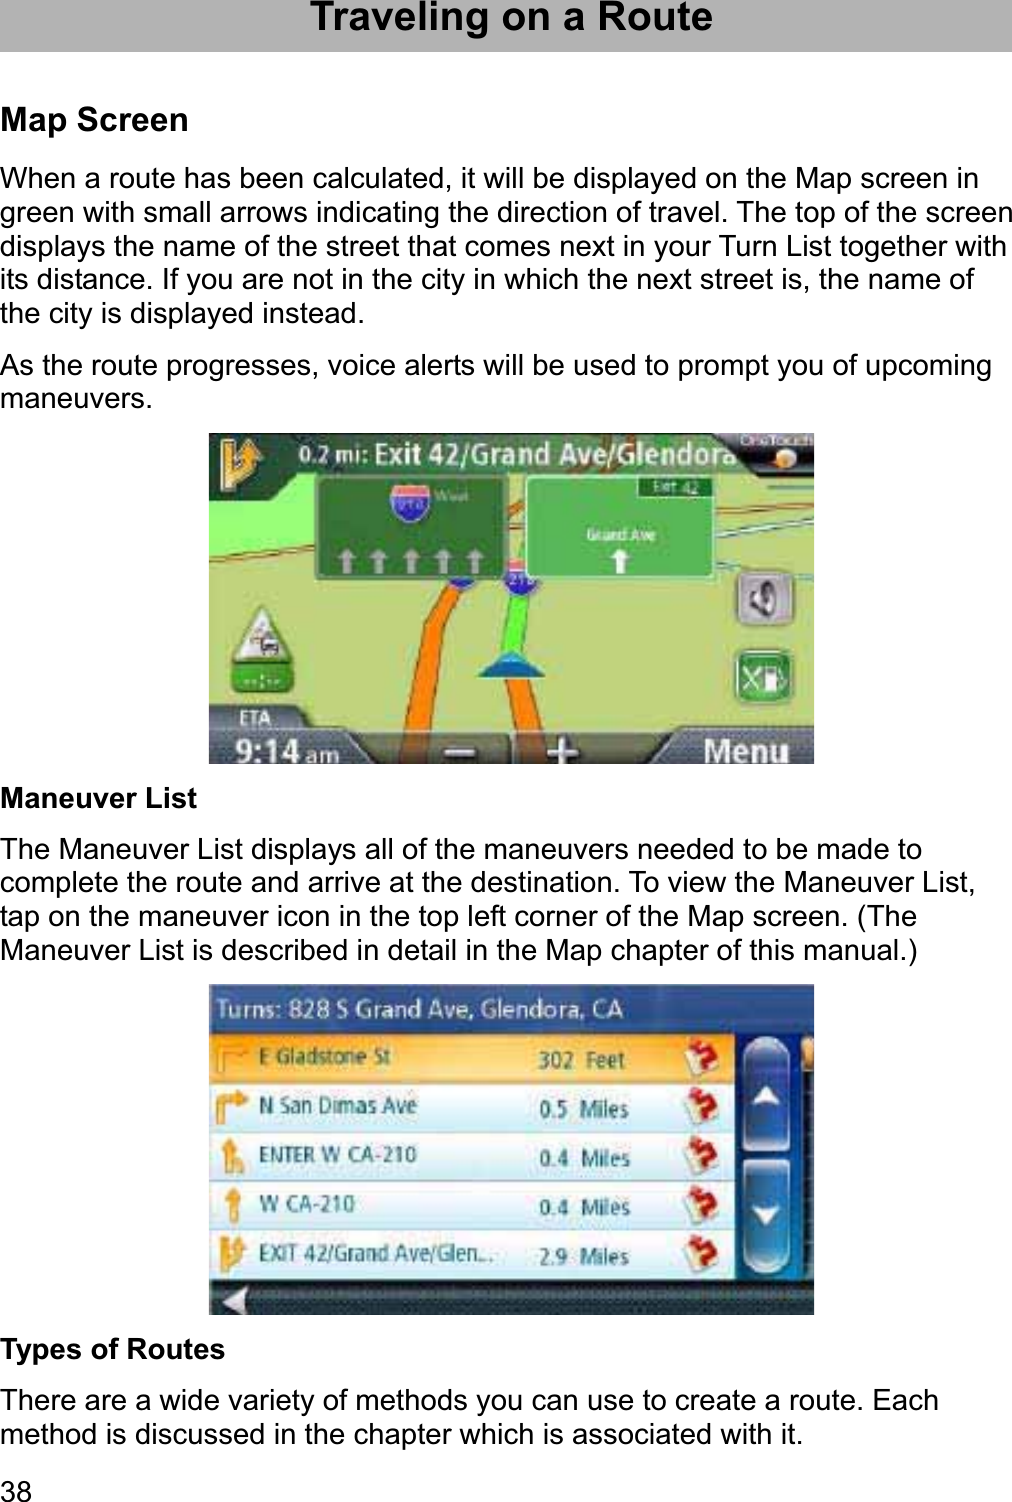 38Traveling on a Route Map Screen When a route has been calculated, it will be displayed on the Map screen in green with small arrows indicating the direction of travel. The top of the screen displays the name of the street that comes next in your Turn List together with its distance. If you are not in the city in which the next street is, the name of the city is displayed instead. As the route progresses, voice alerts will be used to prompt you of upcoming maneuvers.Maneuver List The Maneuver List displays all of the maneuvers needed to be made to complete the route and arrive at the destination. To view the Maneuver List, tap on the maneuver icon in the top left corner of the Map screen. (The Maneuver List is described in detail in the Map chapter of this manual.) Types of Routes There are a wide variety of methods you can use to create a route. Each method is discussed in the chapter which is associated with it. 